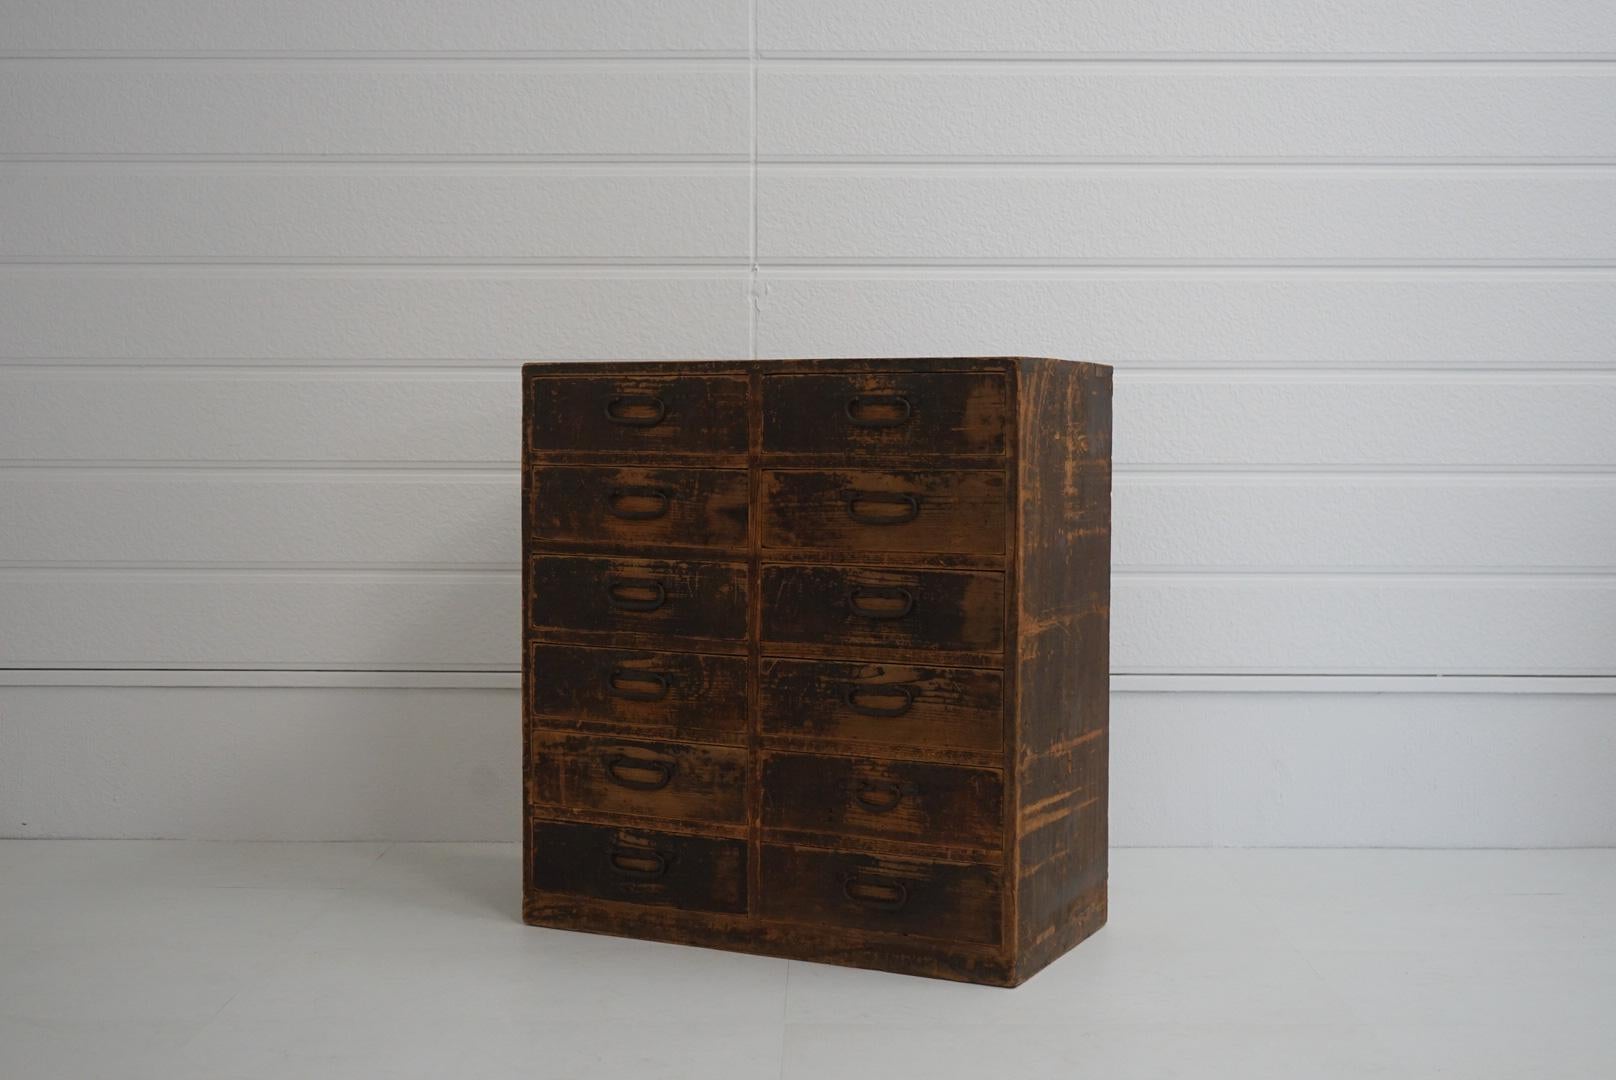 It is a drawer of the Meiji era.
There are 12 drawers in all.
There are no designers in the furniture of this era, and the furniture is made by considering only the people used by the craftsmen.
Modern people are fascinated by its